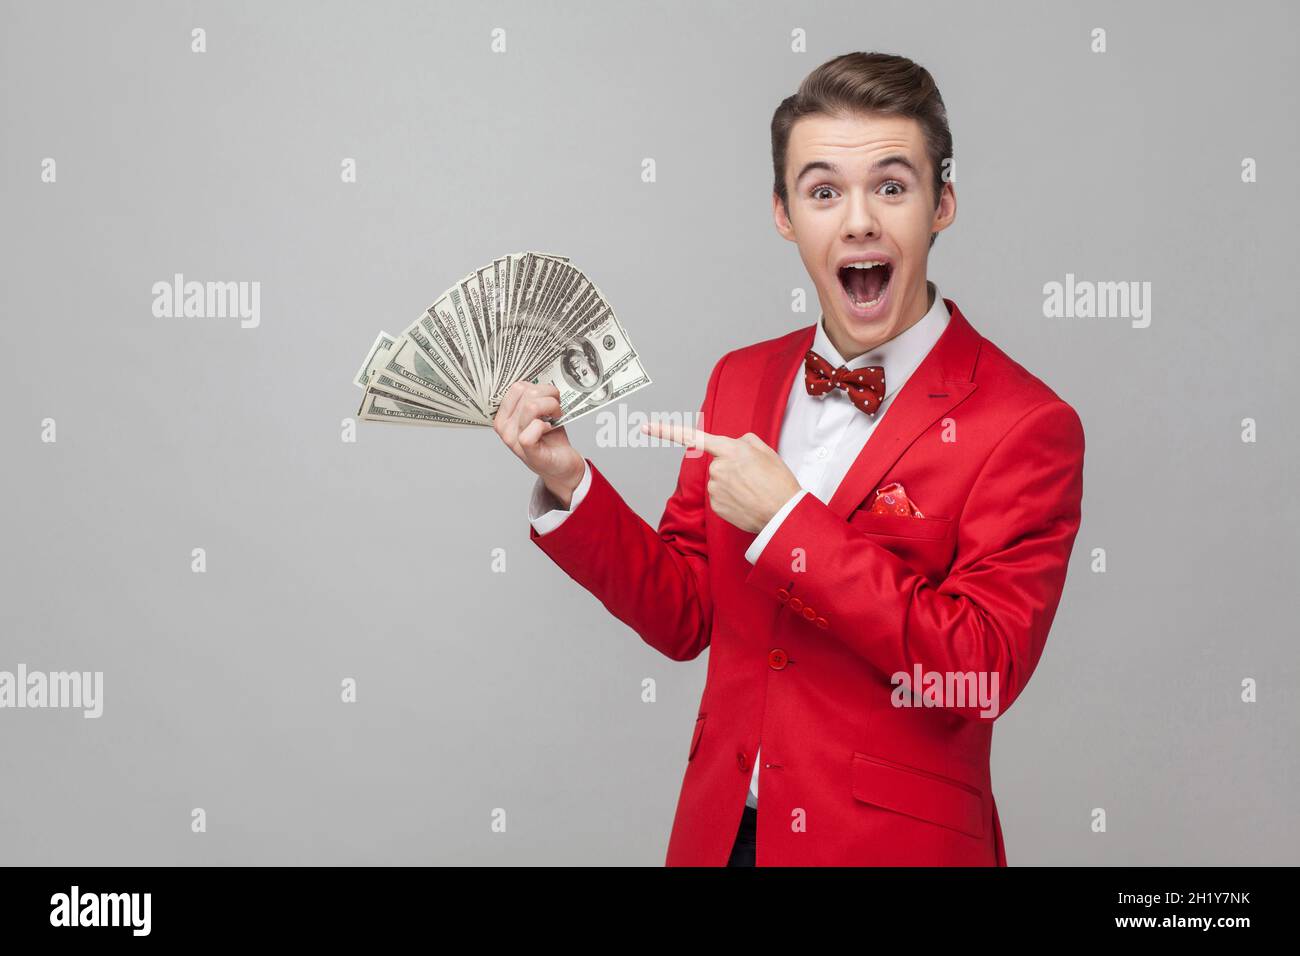 Wow, look at my money. Portrait of surprised man with stylish hairdo in red jacket and bow tie pointing at bunch of dollars, expressing extreme joy and amazement. indoor studio shot, gray background Stock Photo